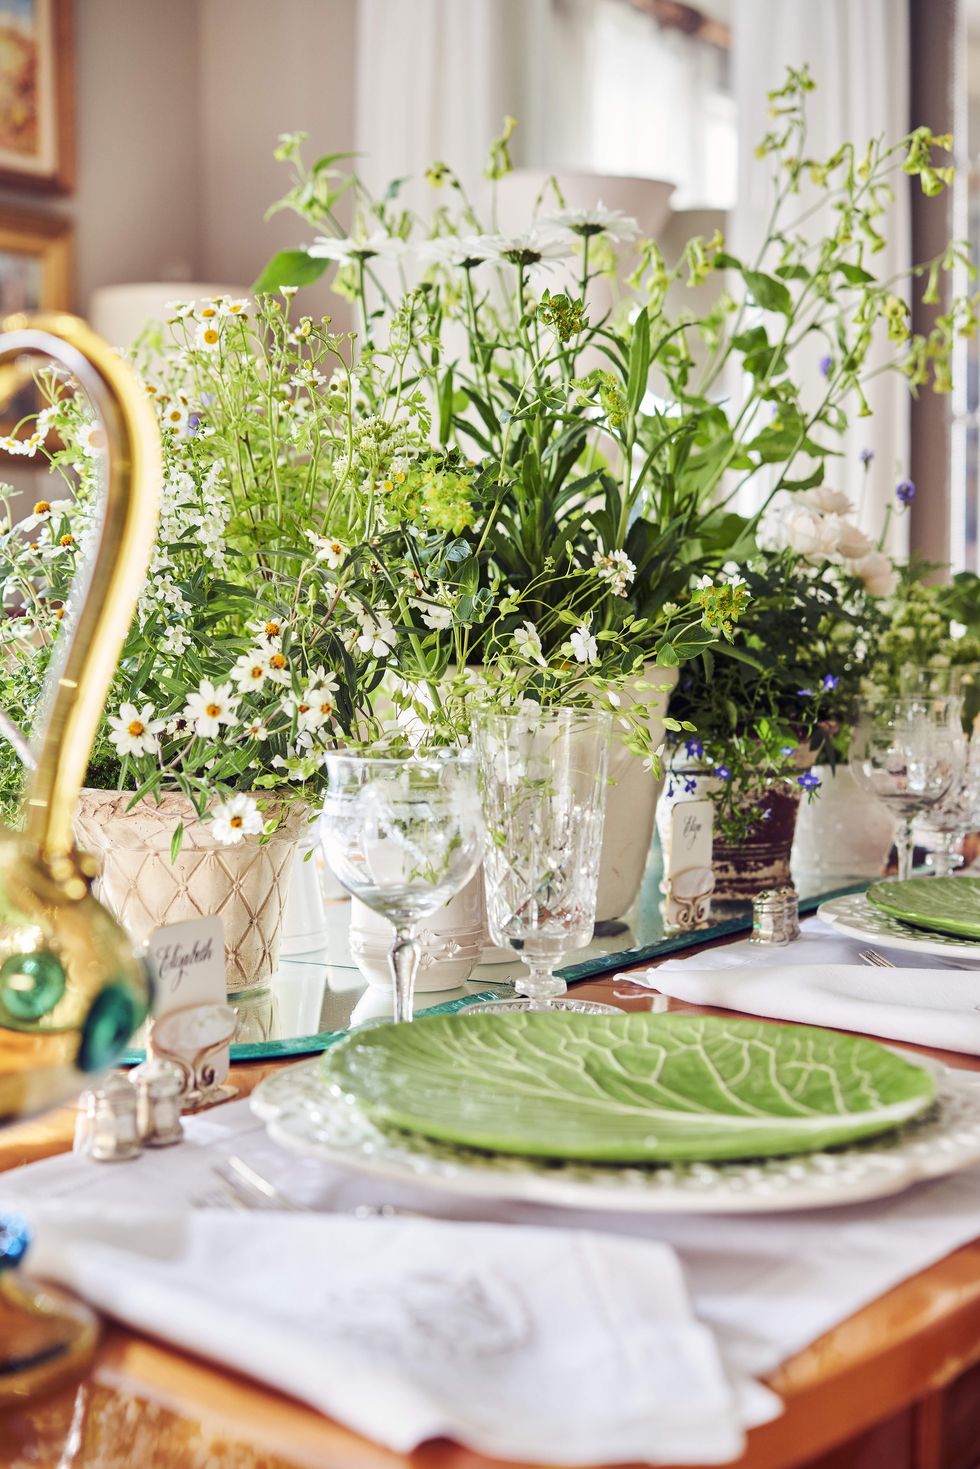 a table set with lettuceware dishes and wildflowers